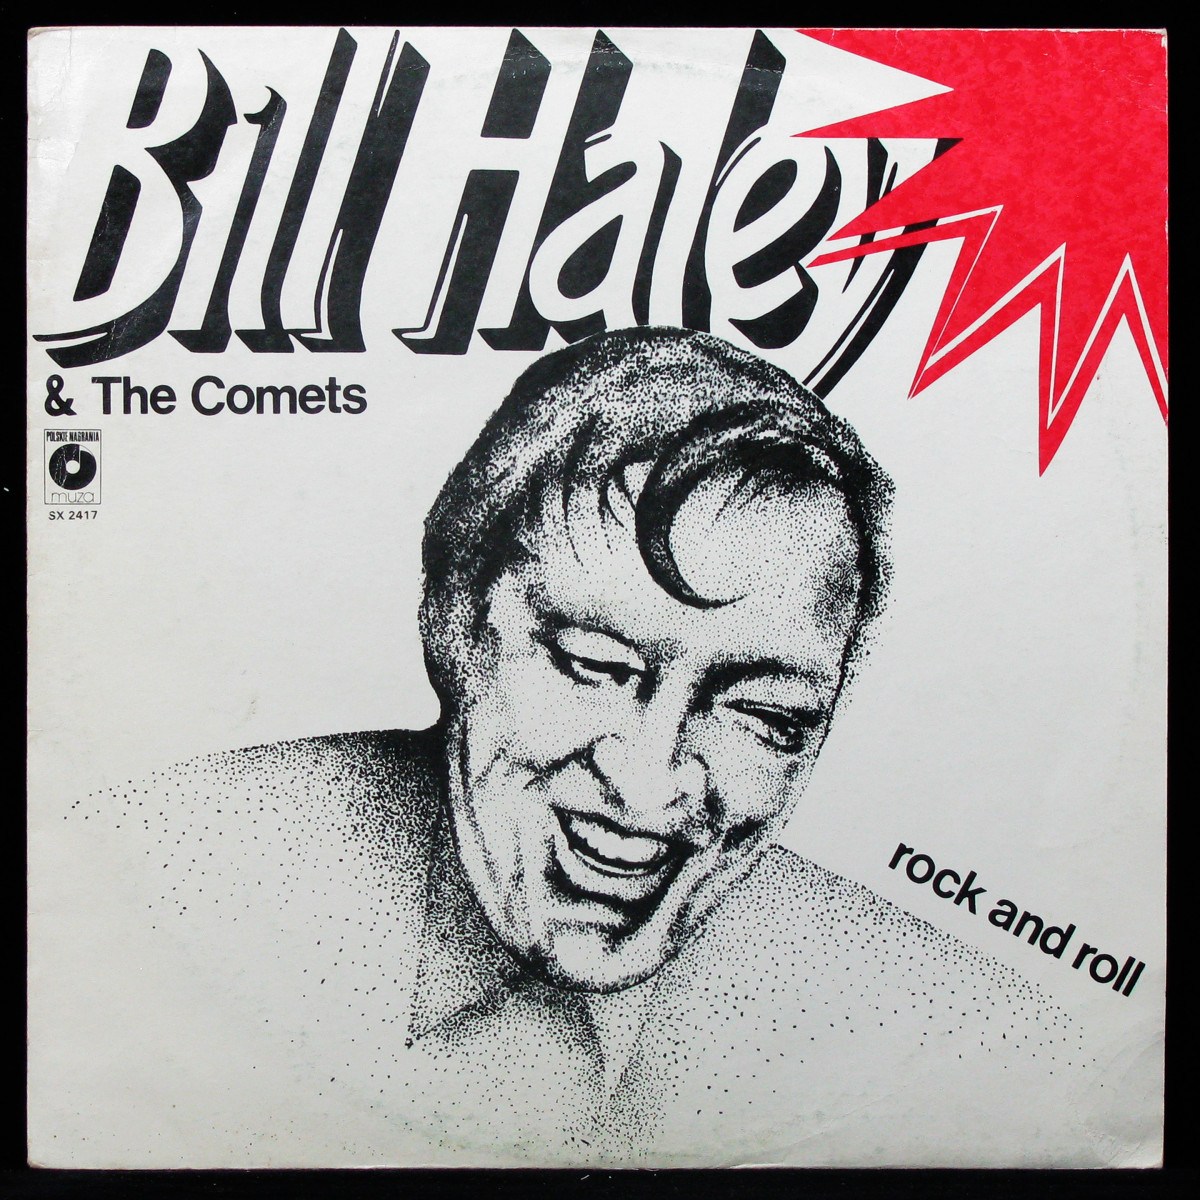 LP Bill Haley & The Comets — Rock And Roll фото